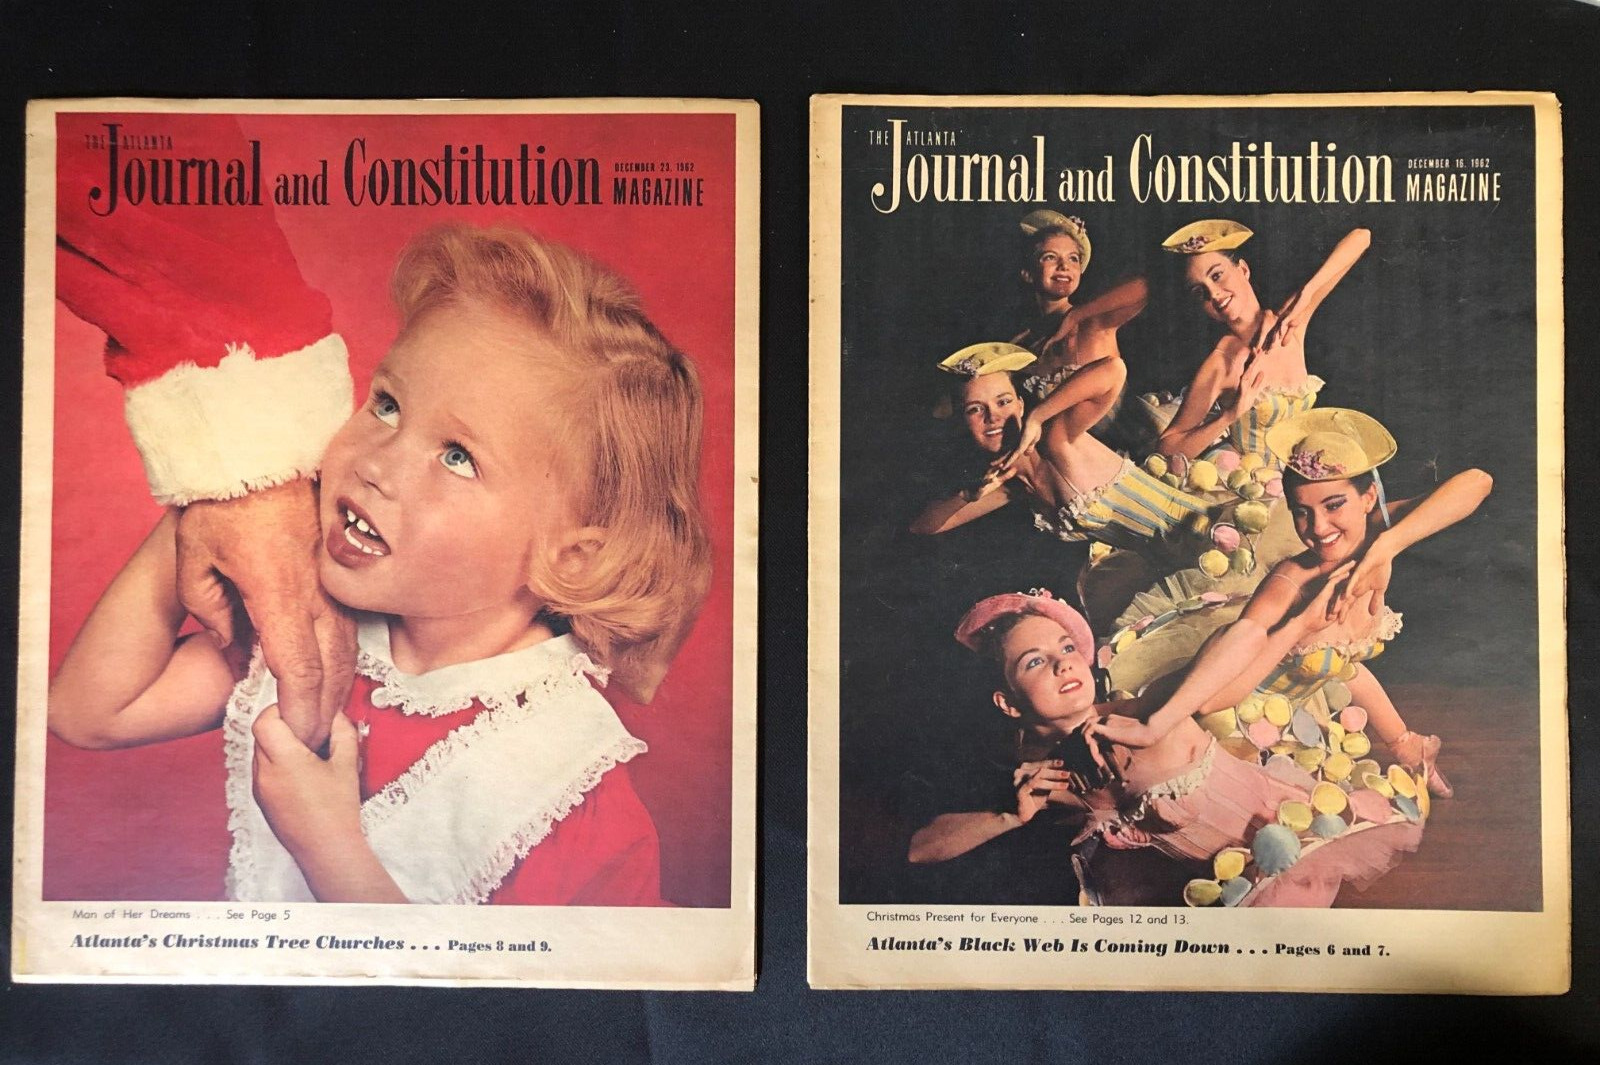 2 Christmas Issues of The Atlanta Journal and Constitution Magazine, Dec 1962